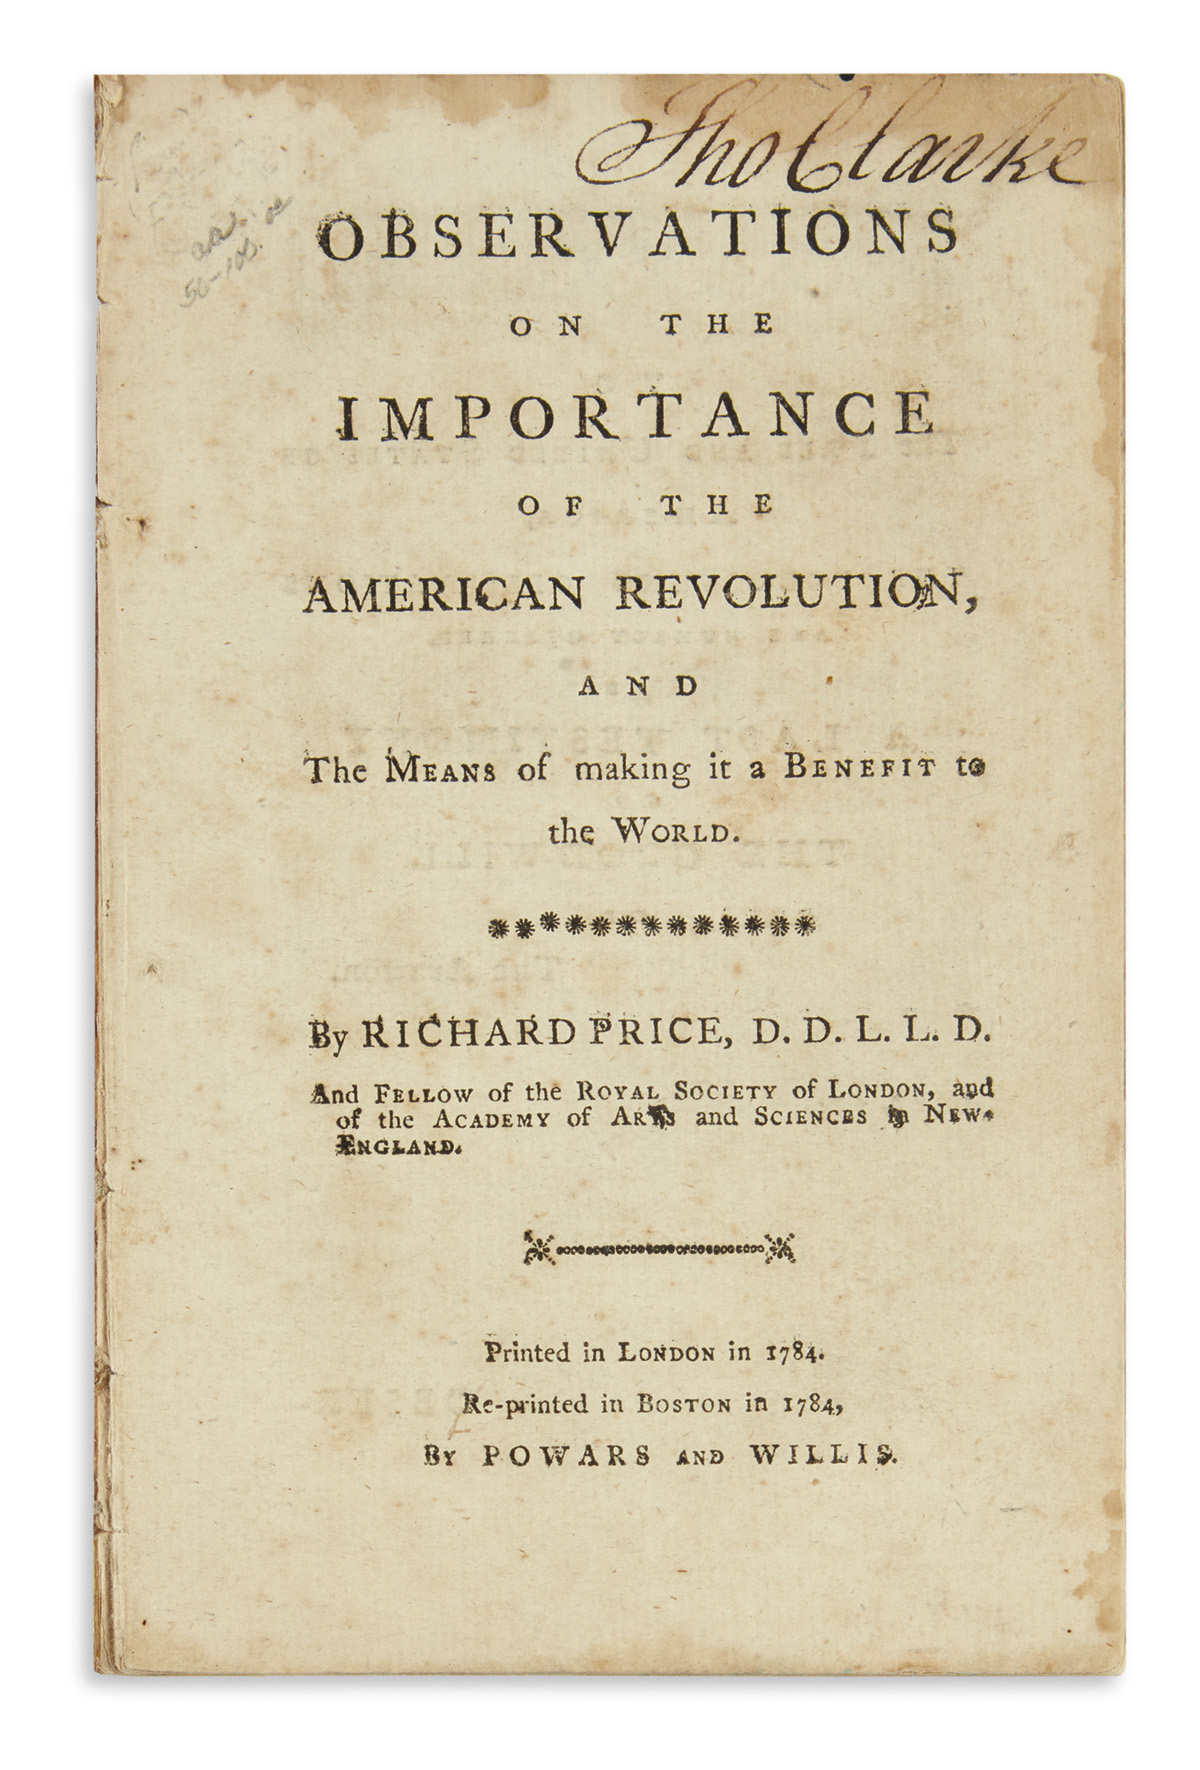 (AMERICAN REVOLUTION--HISTORY.) Price, Richard. Observations on the Importance of the American Revolution.